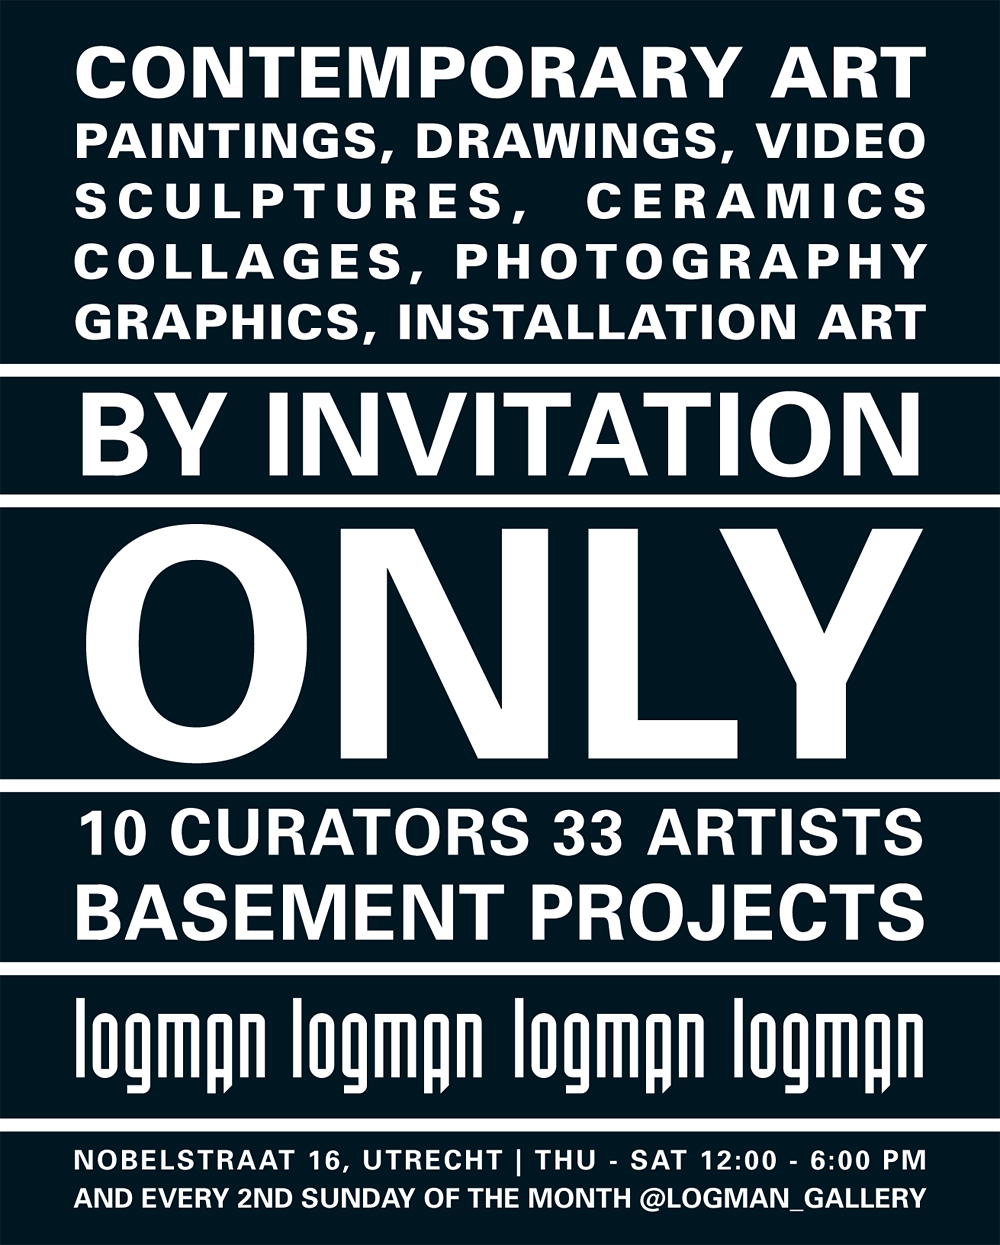 By Invitation Only @ Logman Gallery